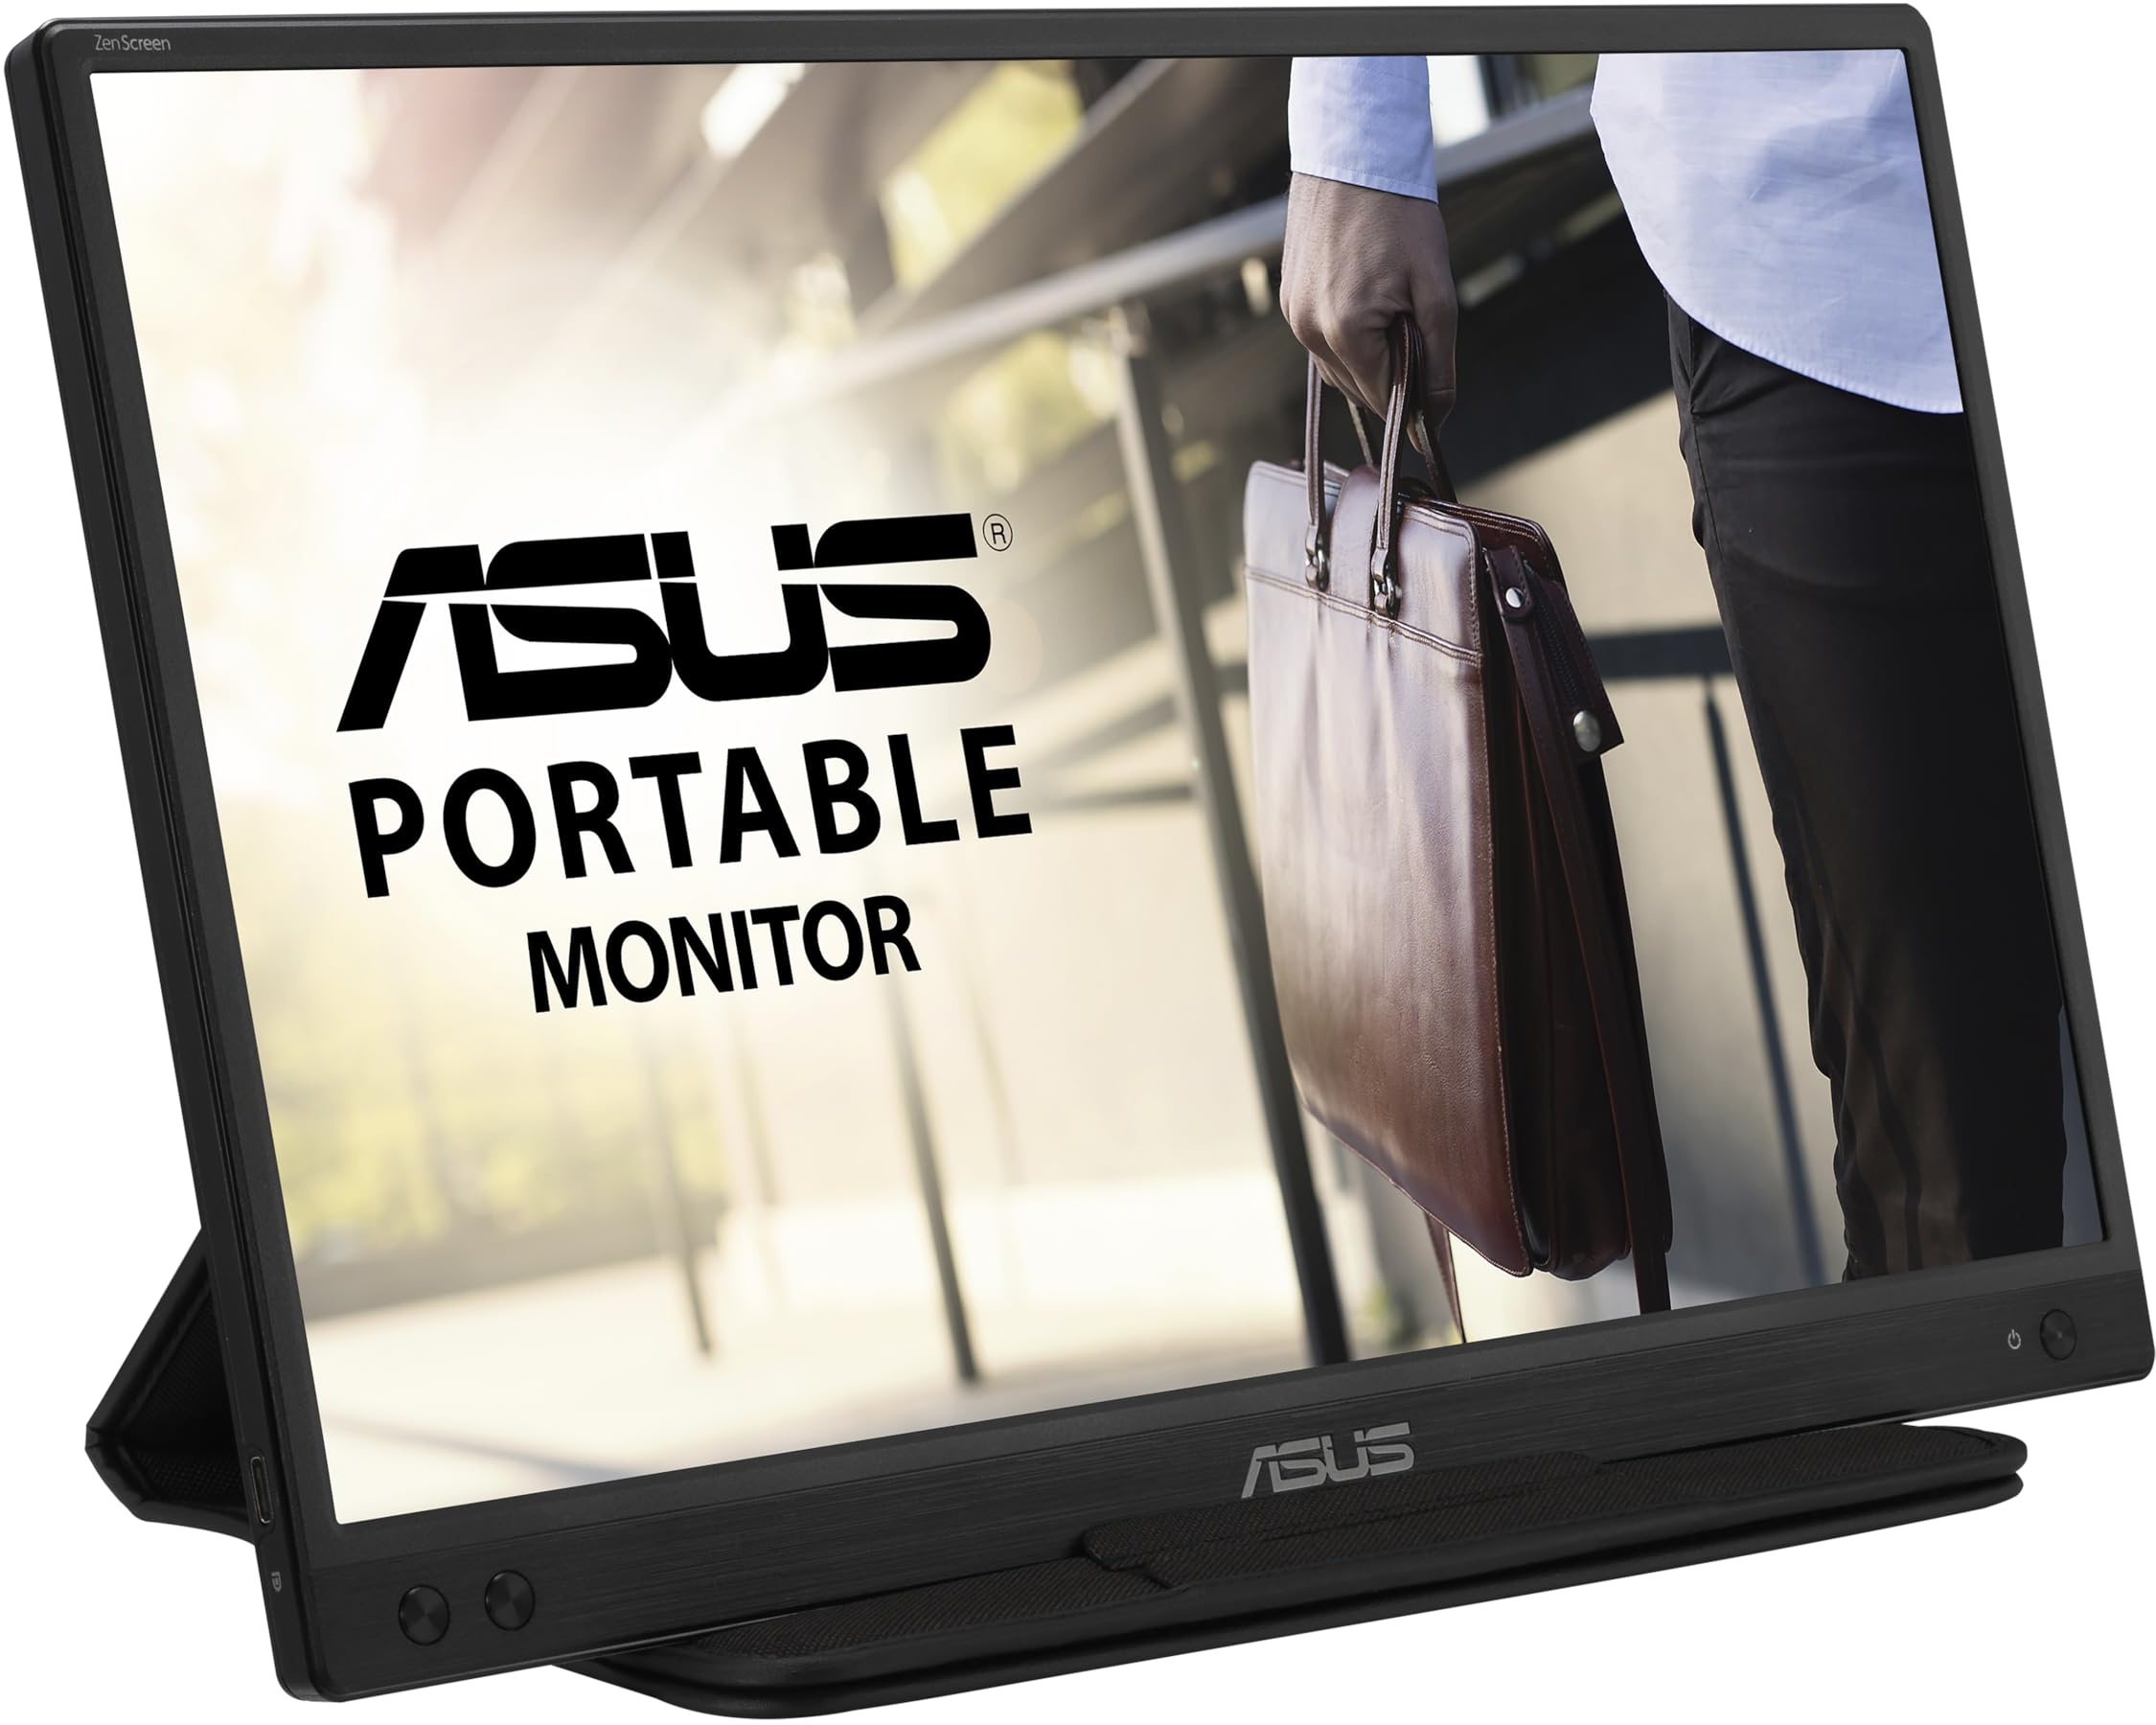 ASUS ZenScreen Portable Monitor 15.6" 1080P FHD Laptop Monitor (MB166C) - IPS USB-C Travel Monitor, Flicker-free and Blue Light Filter w/Smart Cover, External Monitor For Laptop & Macbook, schwarz